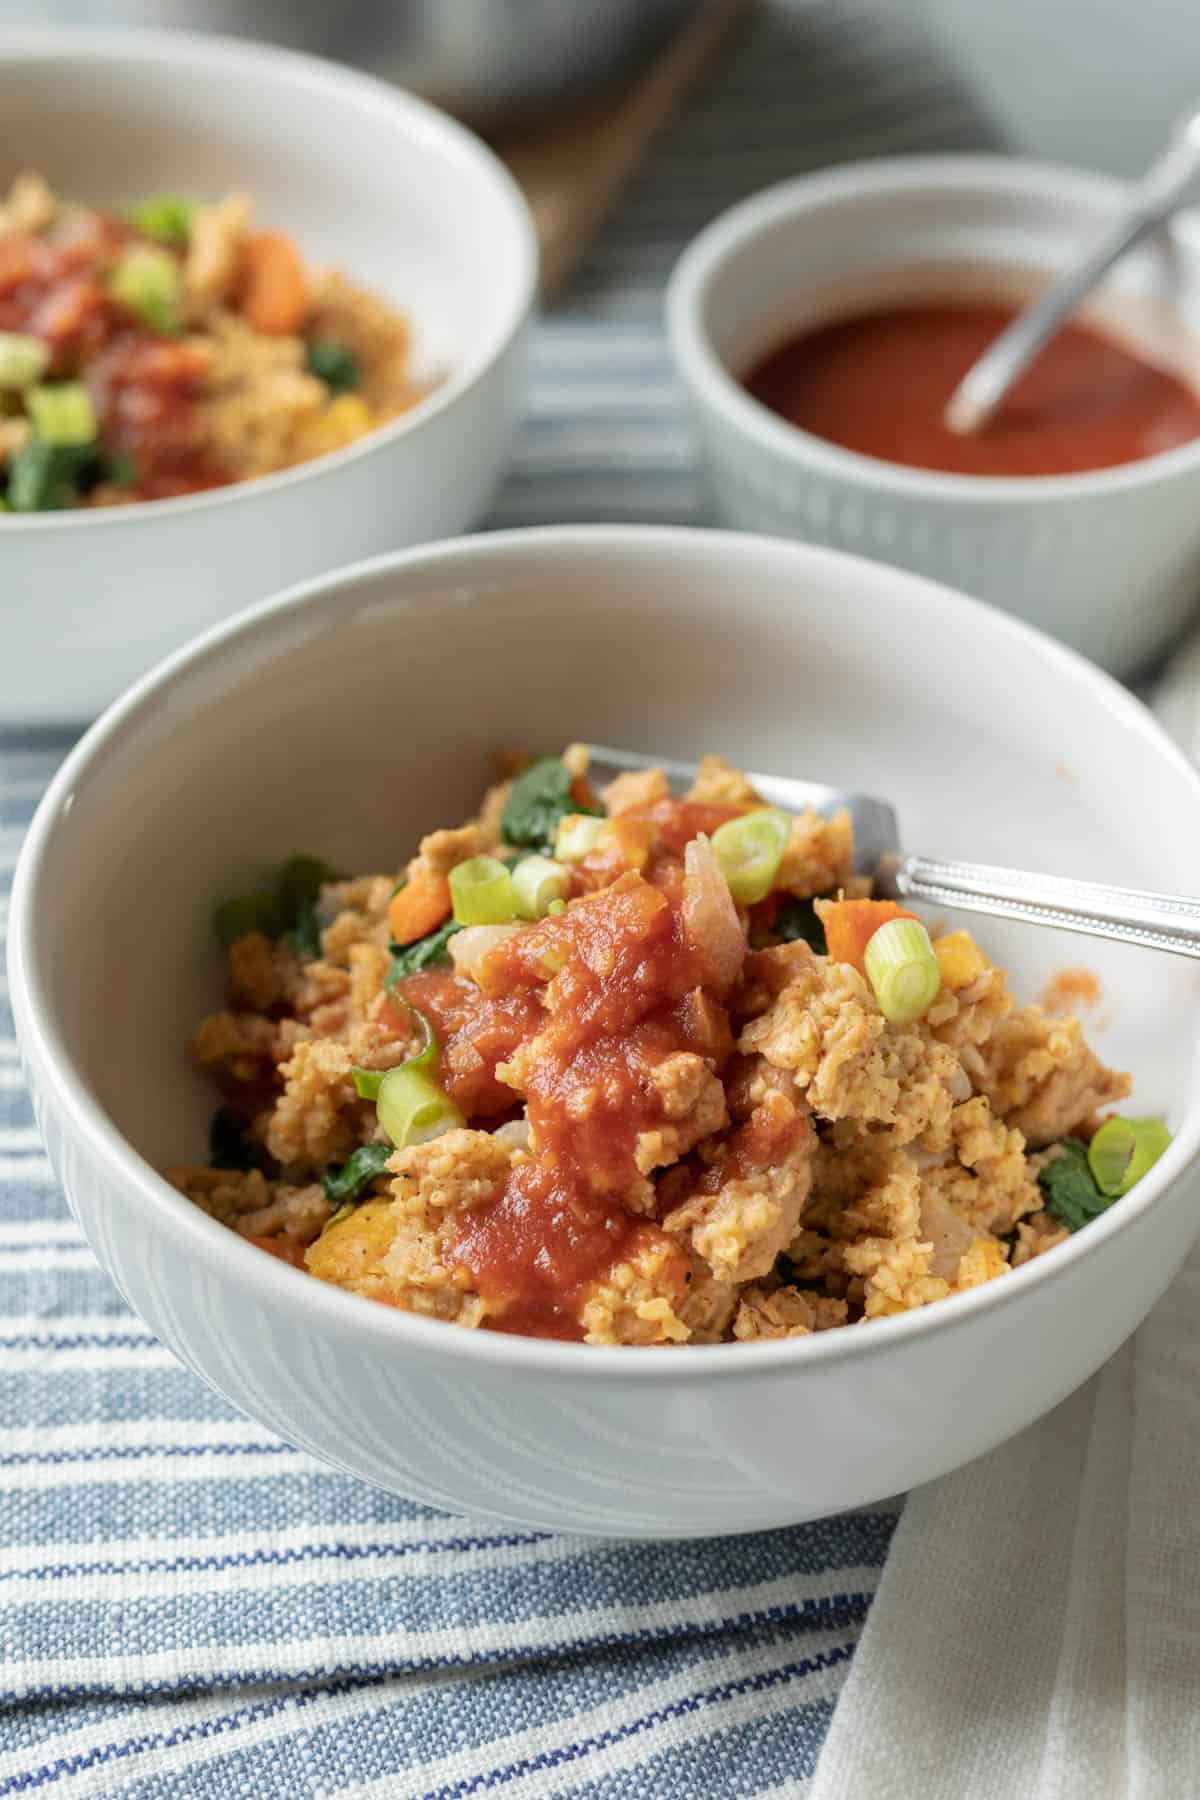 serving of Tex-Mex millet topped with red tomato salsa.